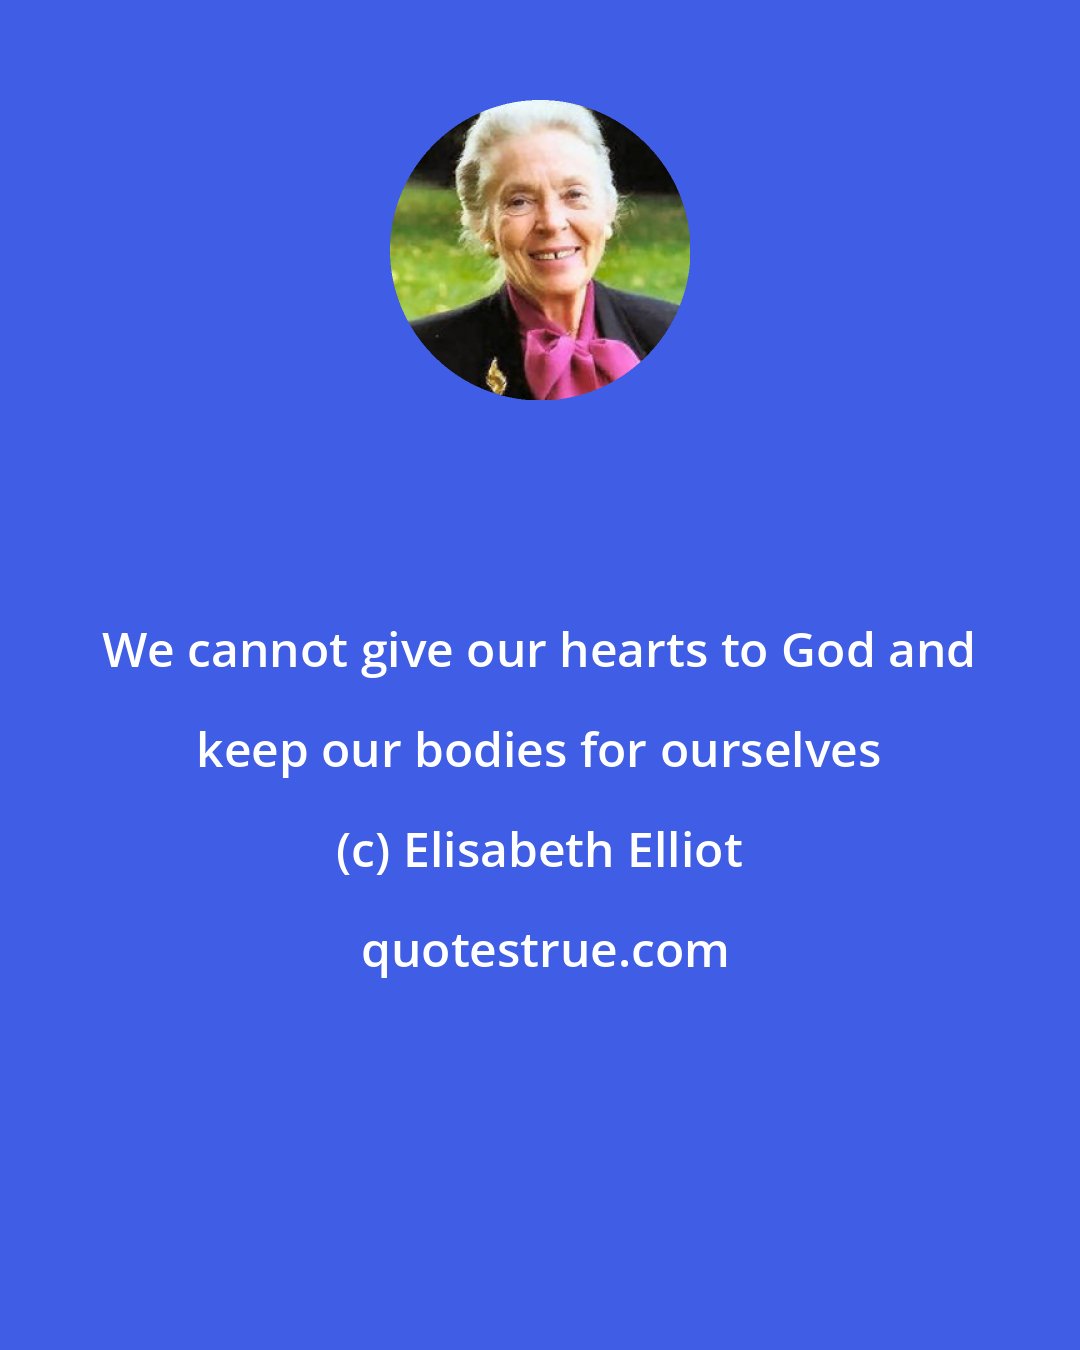 Elisabeth Elliot: We cannot give our hearts to God and keep our bodies for ourselves